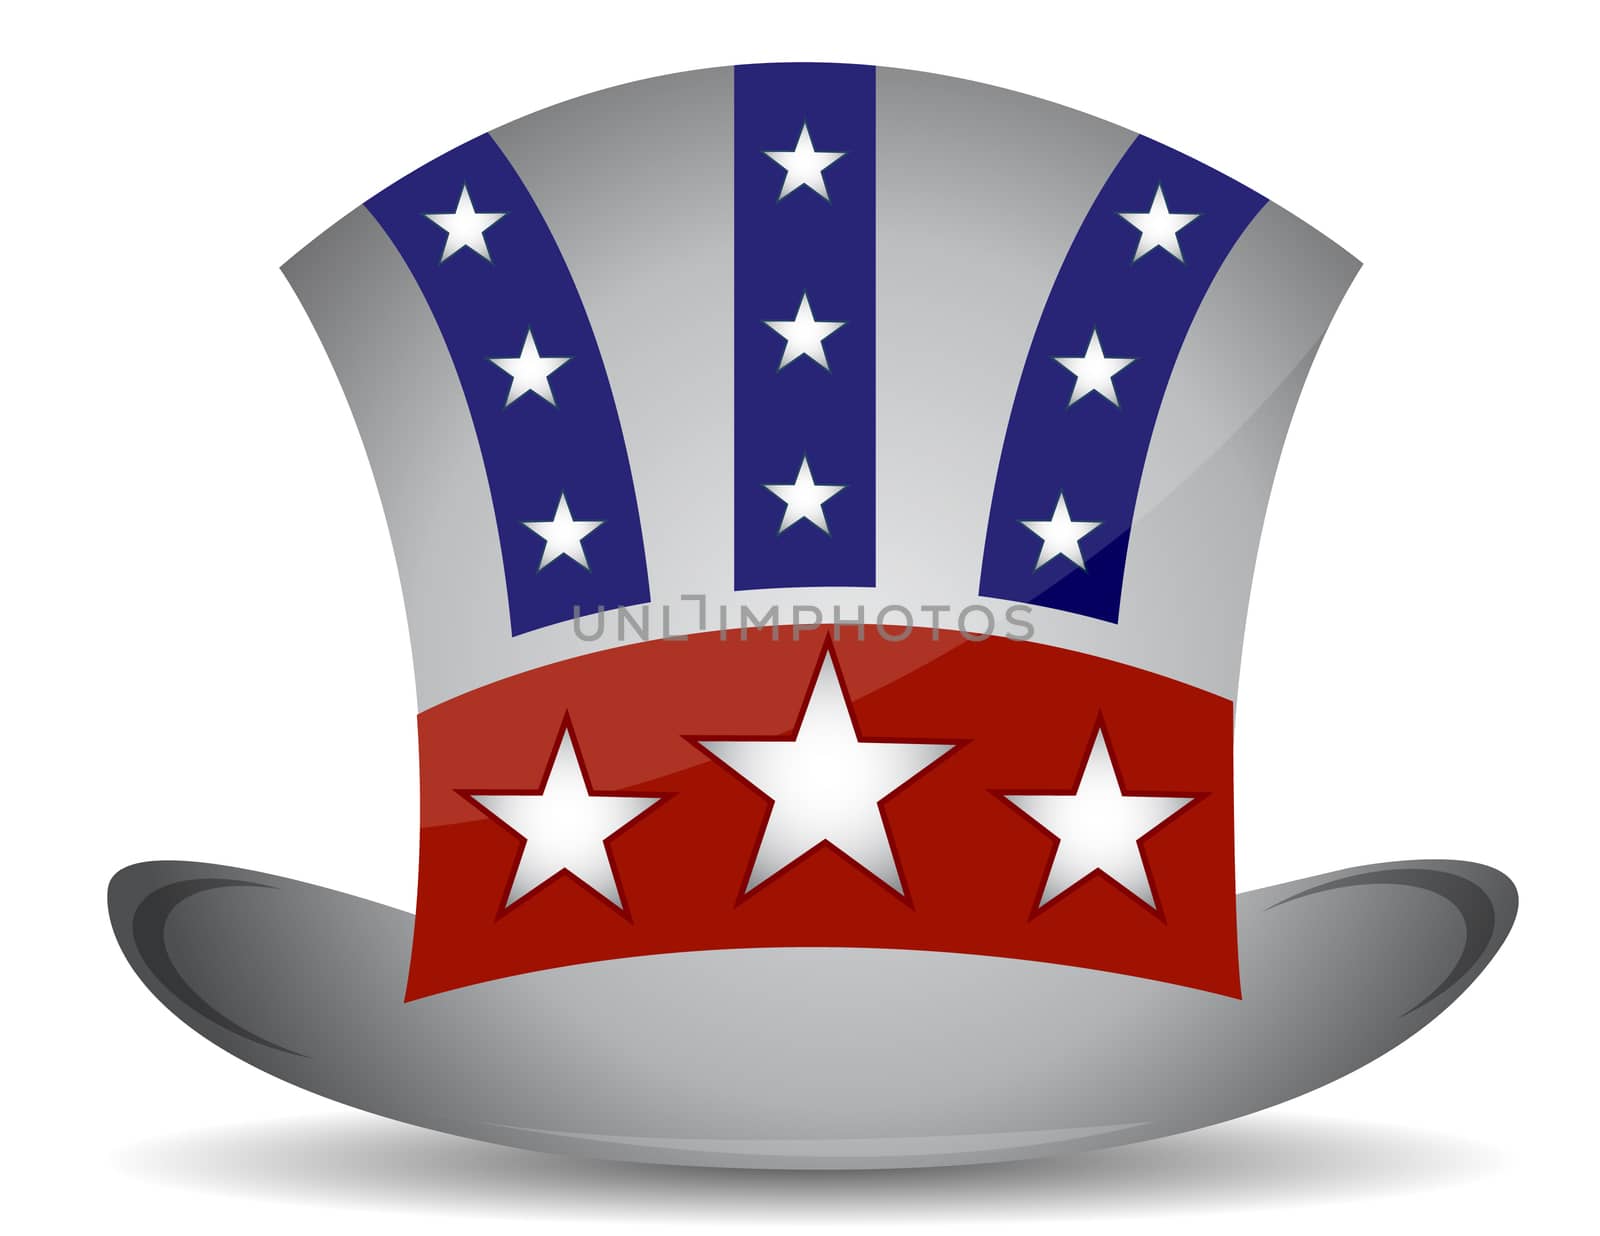 US hat illustration design isolated over a white background